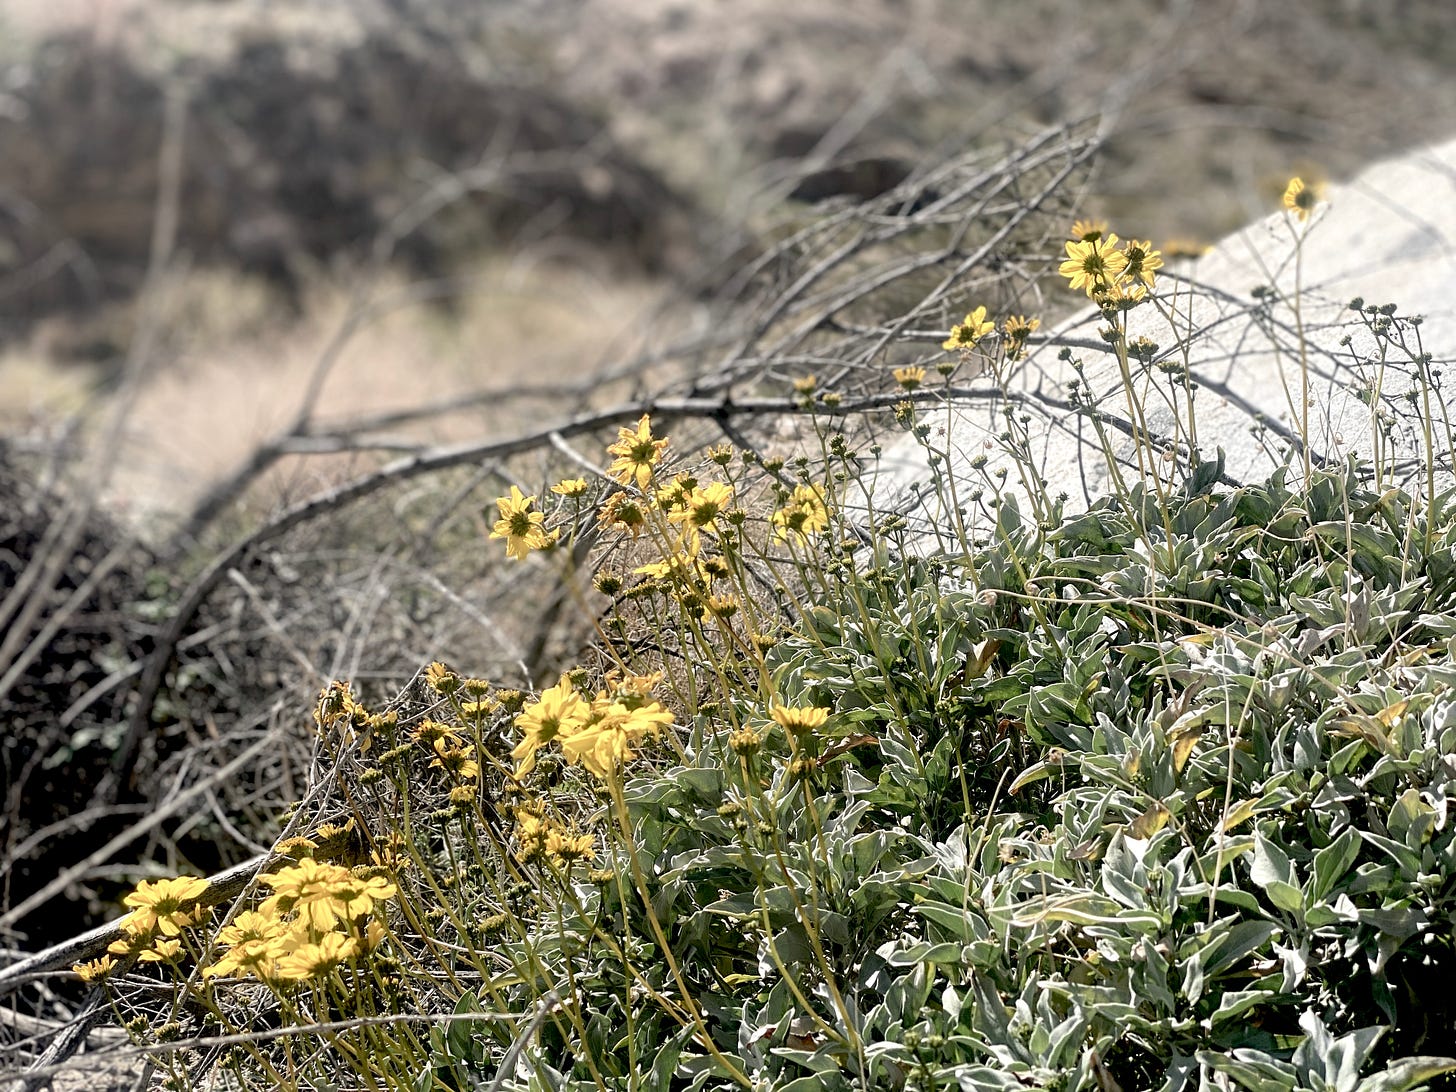 Small sunflowers in an arid landscape